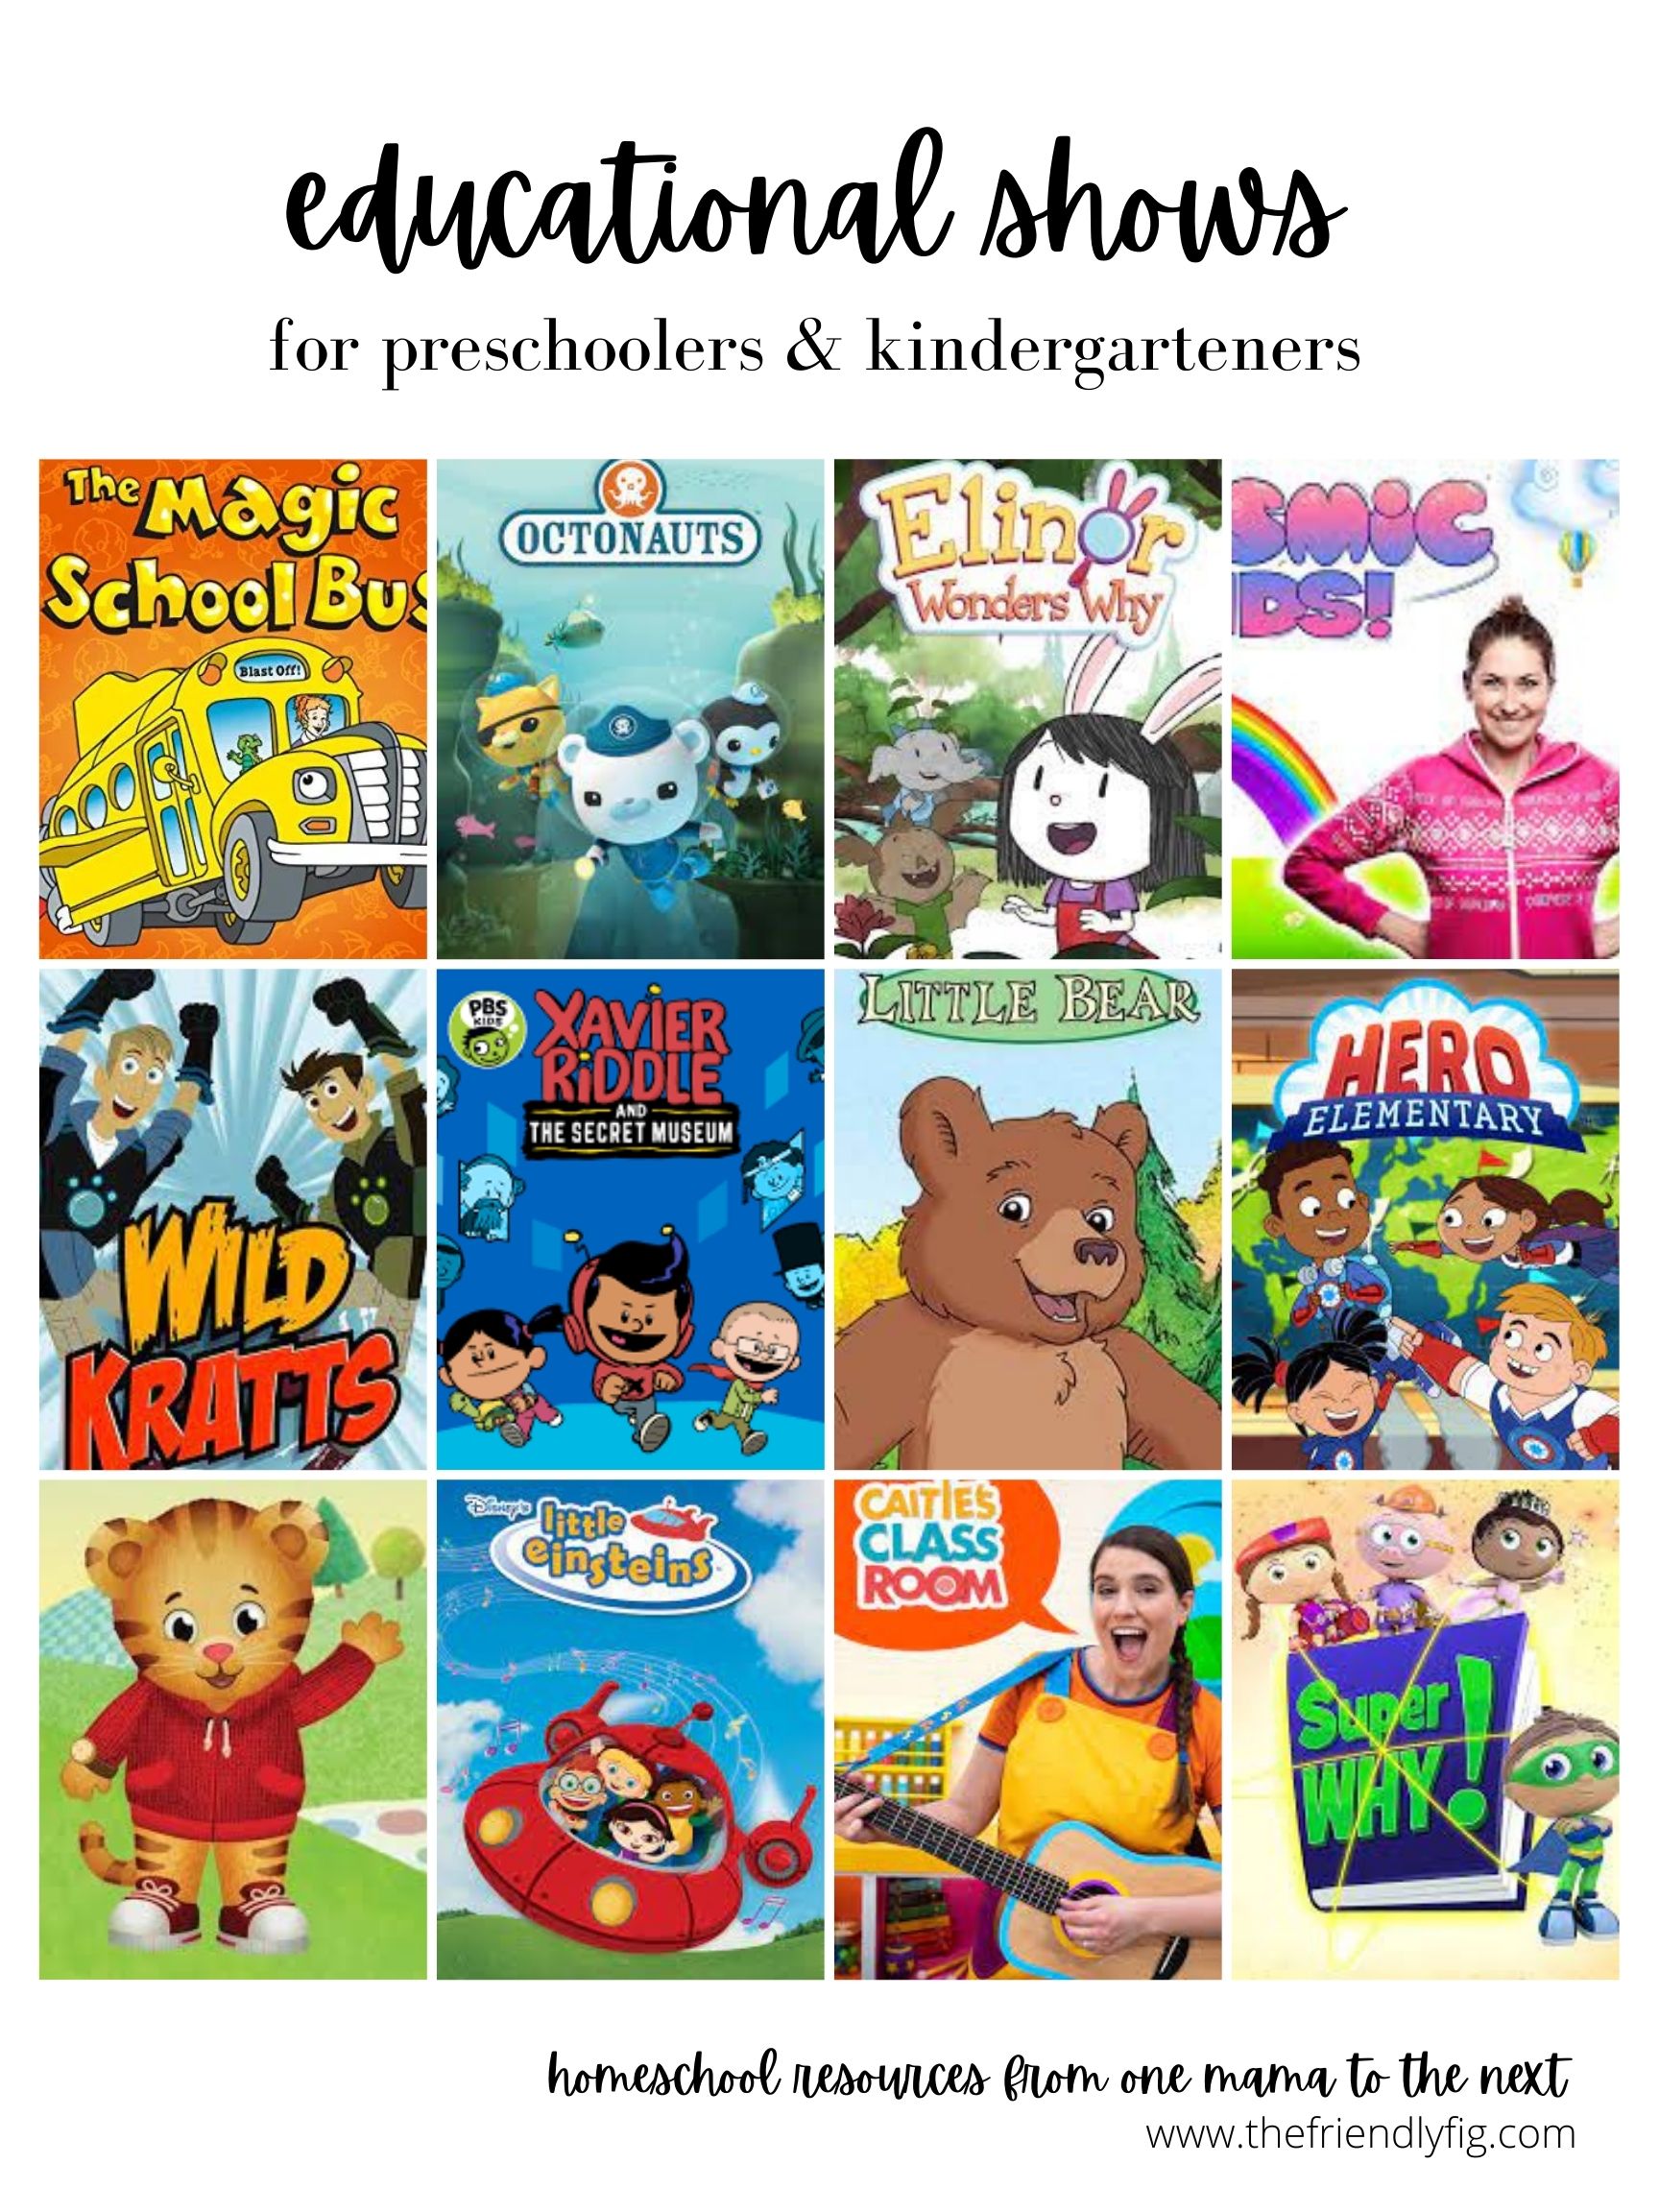 Screen Time & Favorite Educational Shows for Preschoolers